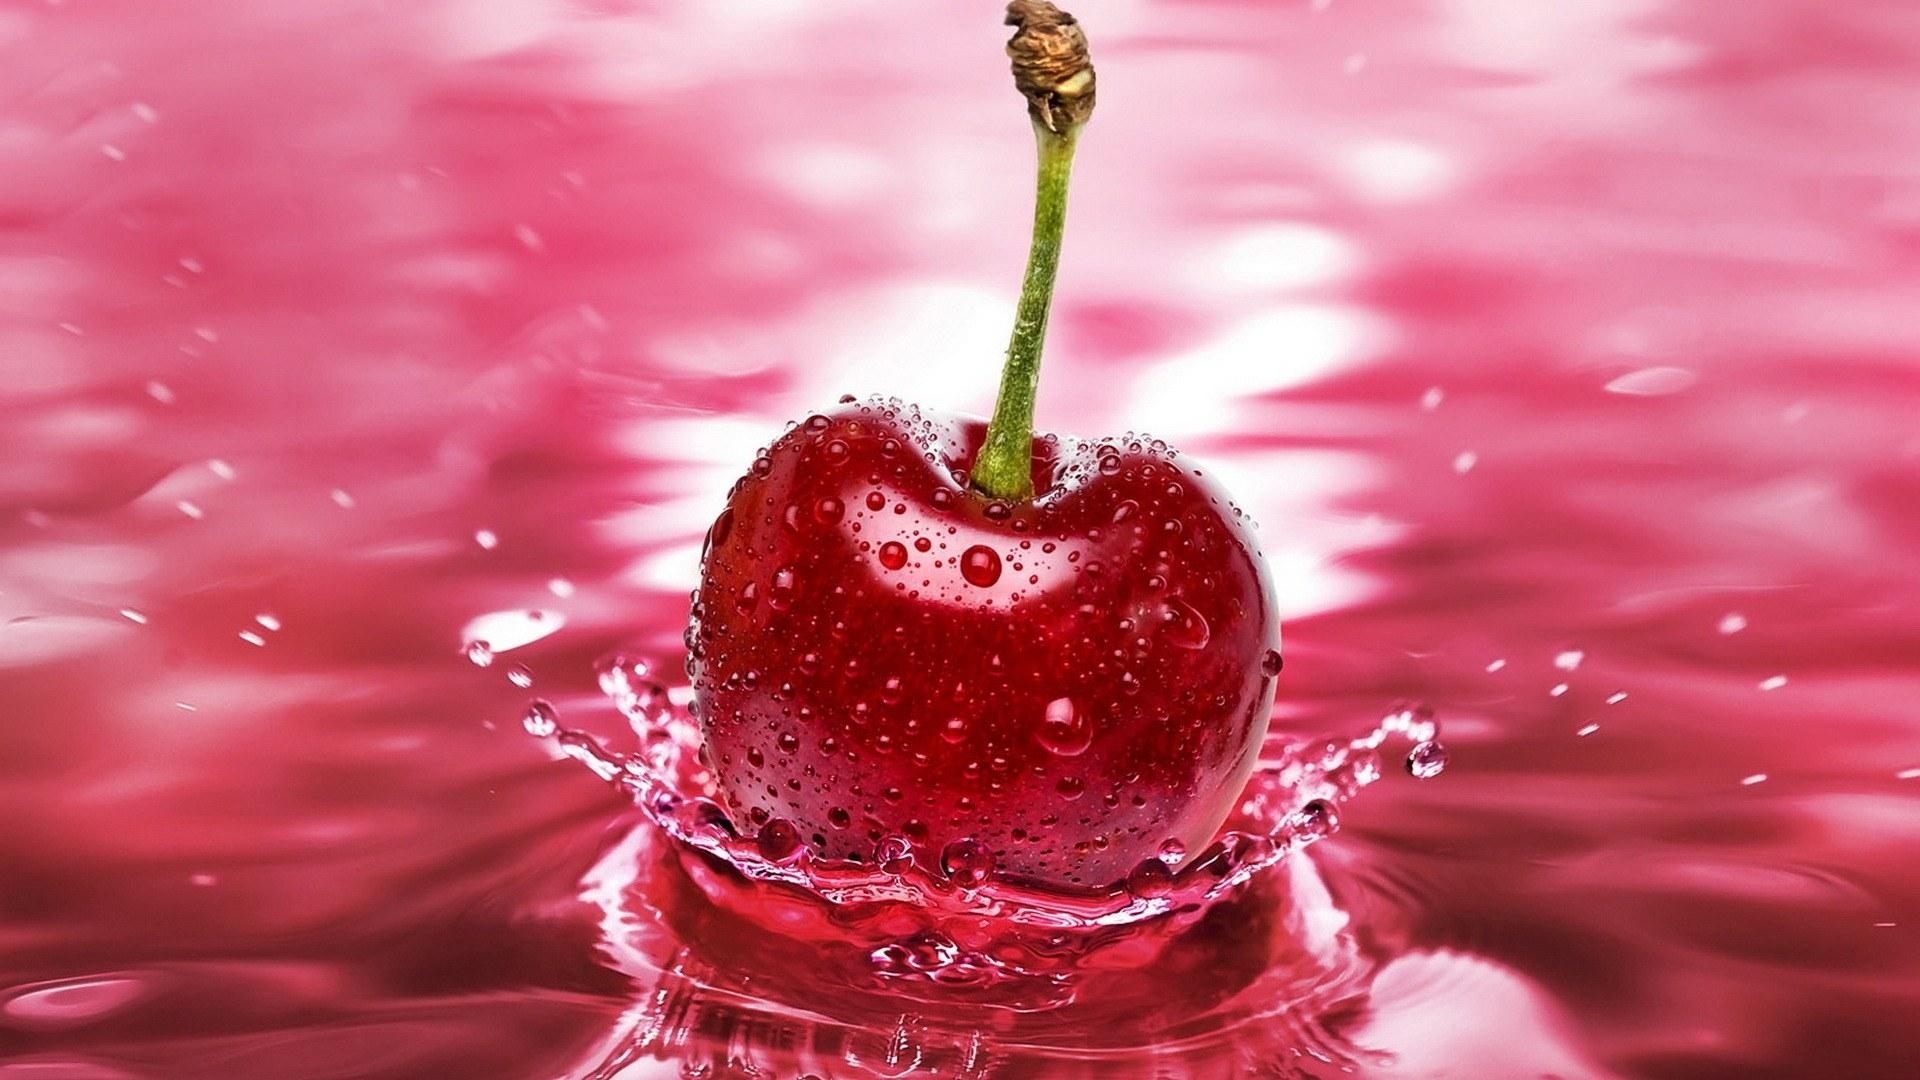 fruits, drops, water, food, cherry, red 1080p